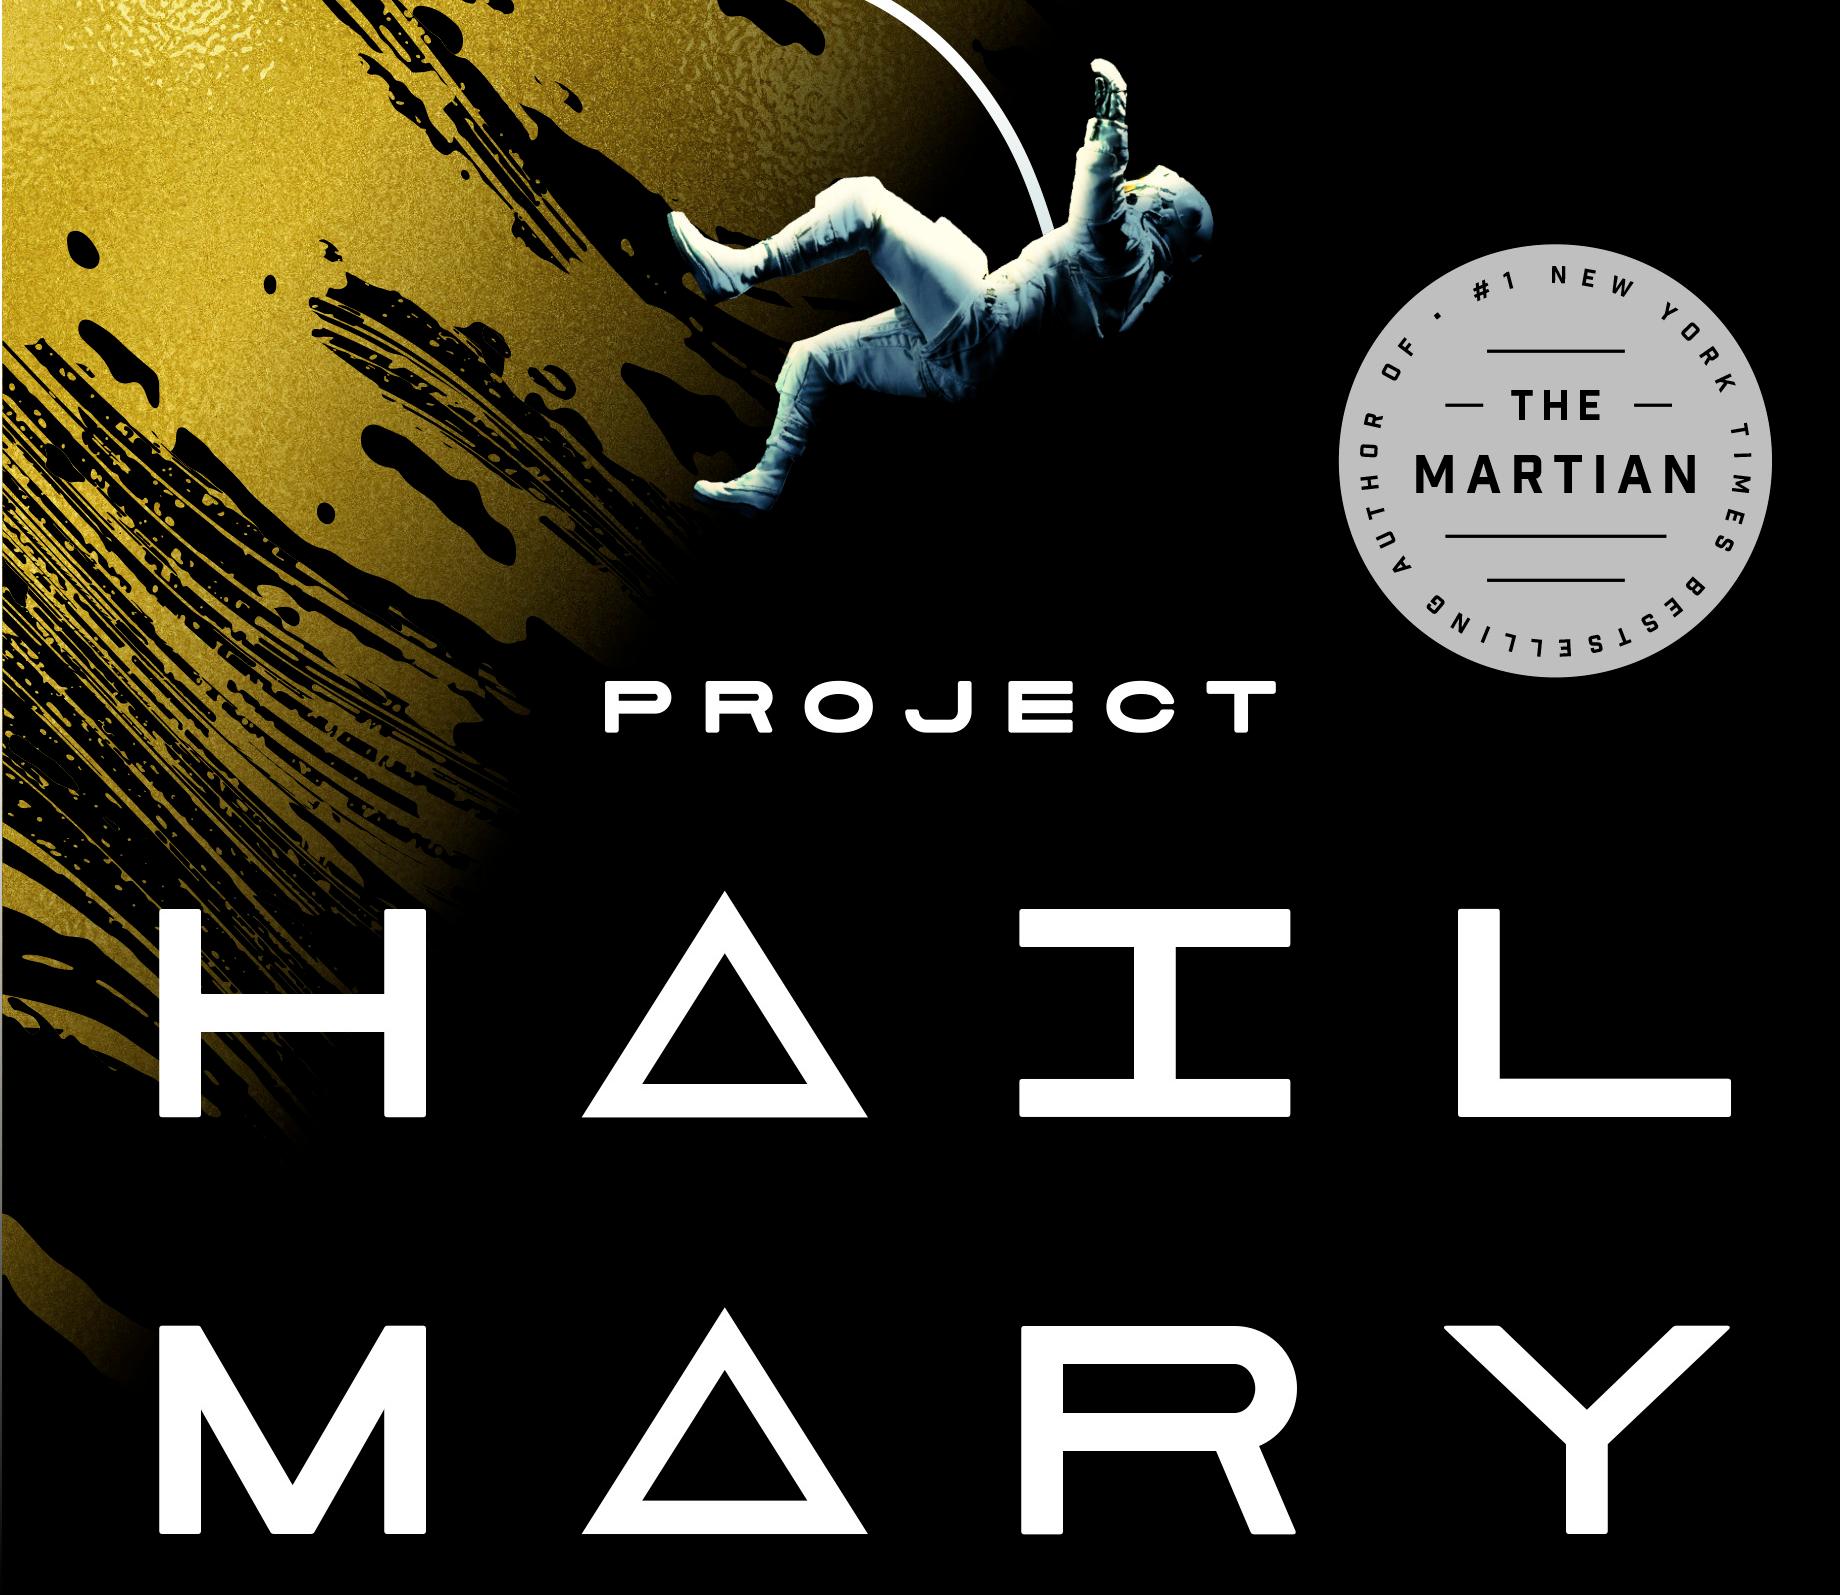 Project Hail Mary: If the new film with Ryan Gosling is worth waiting for.